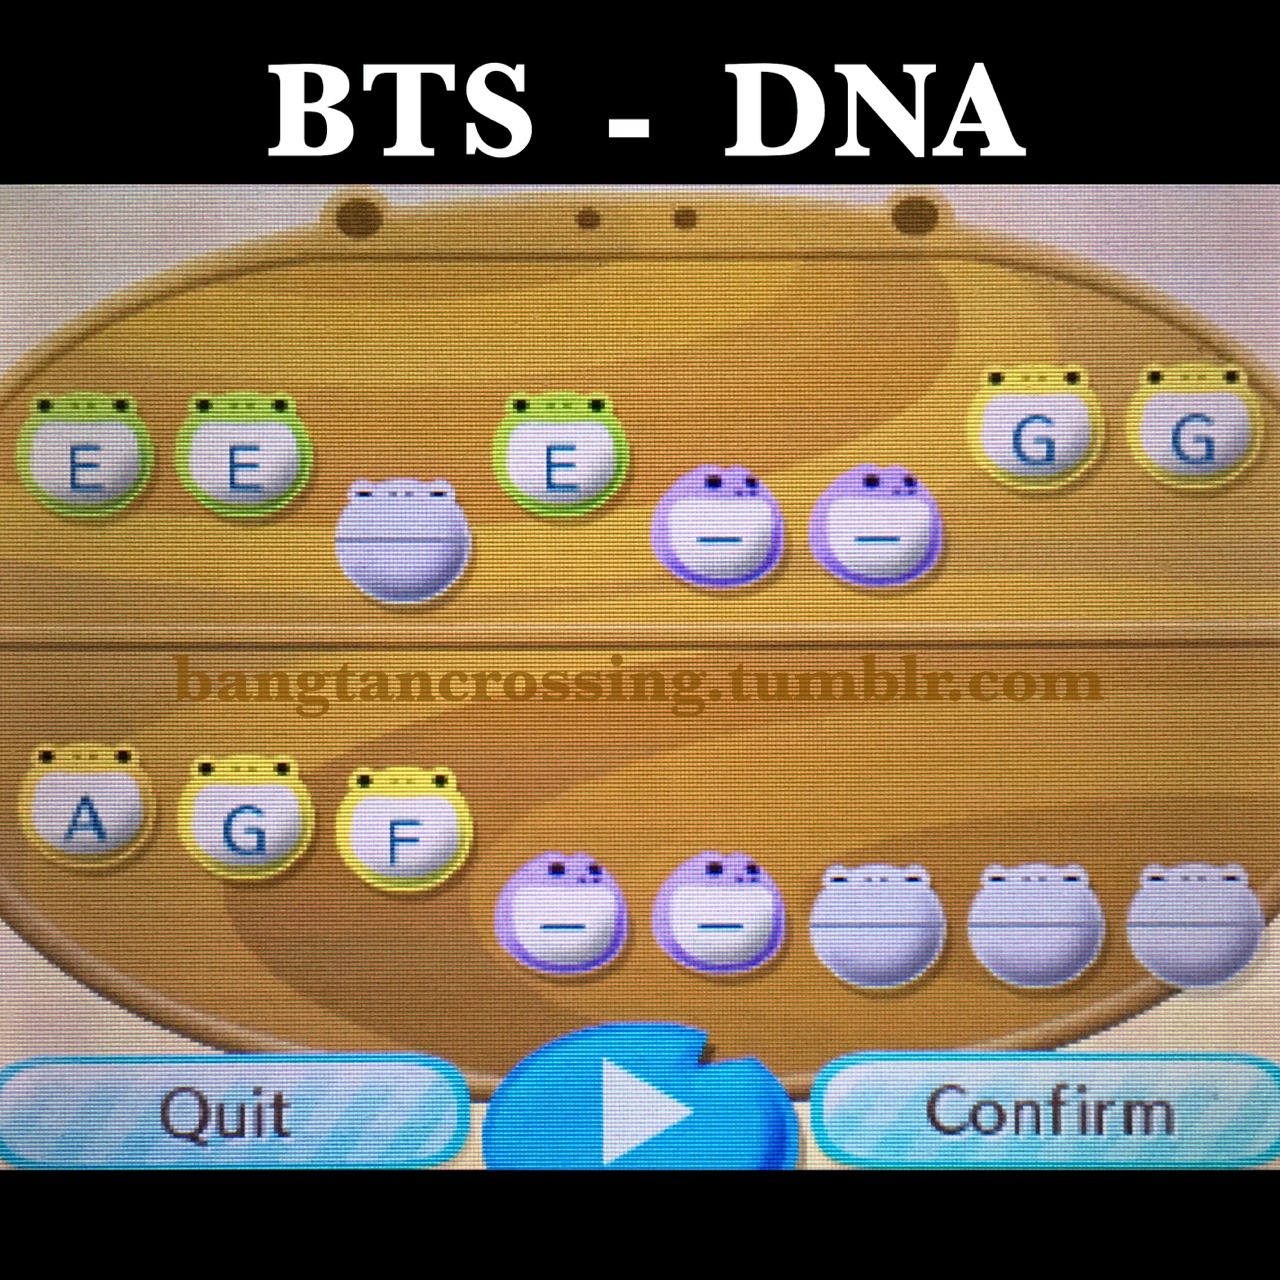 Dna Bts Animal Crossing - roblox id code for bts dna